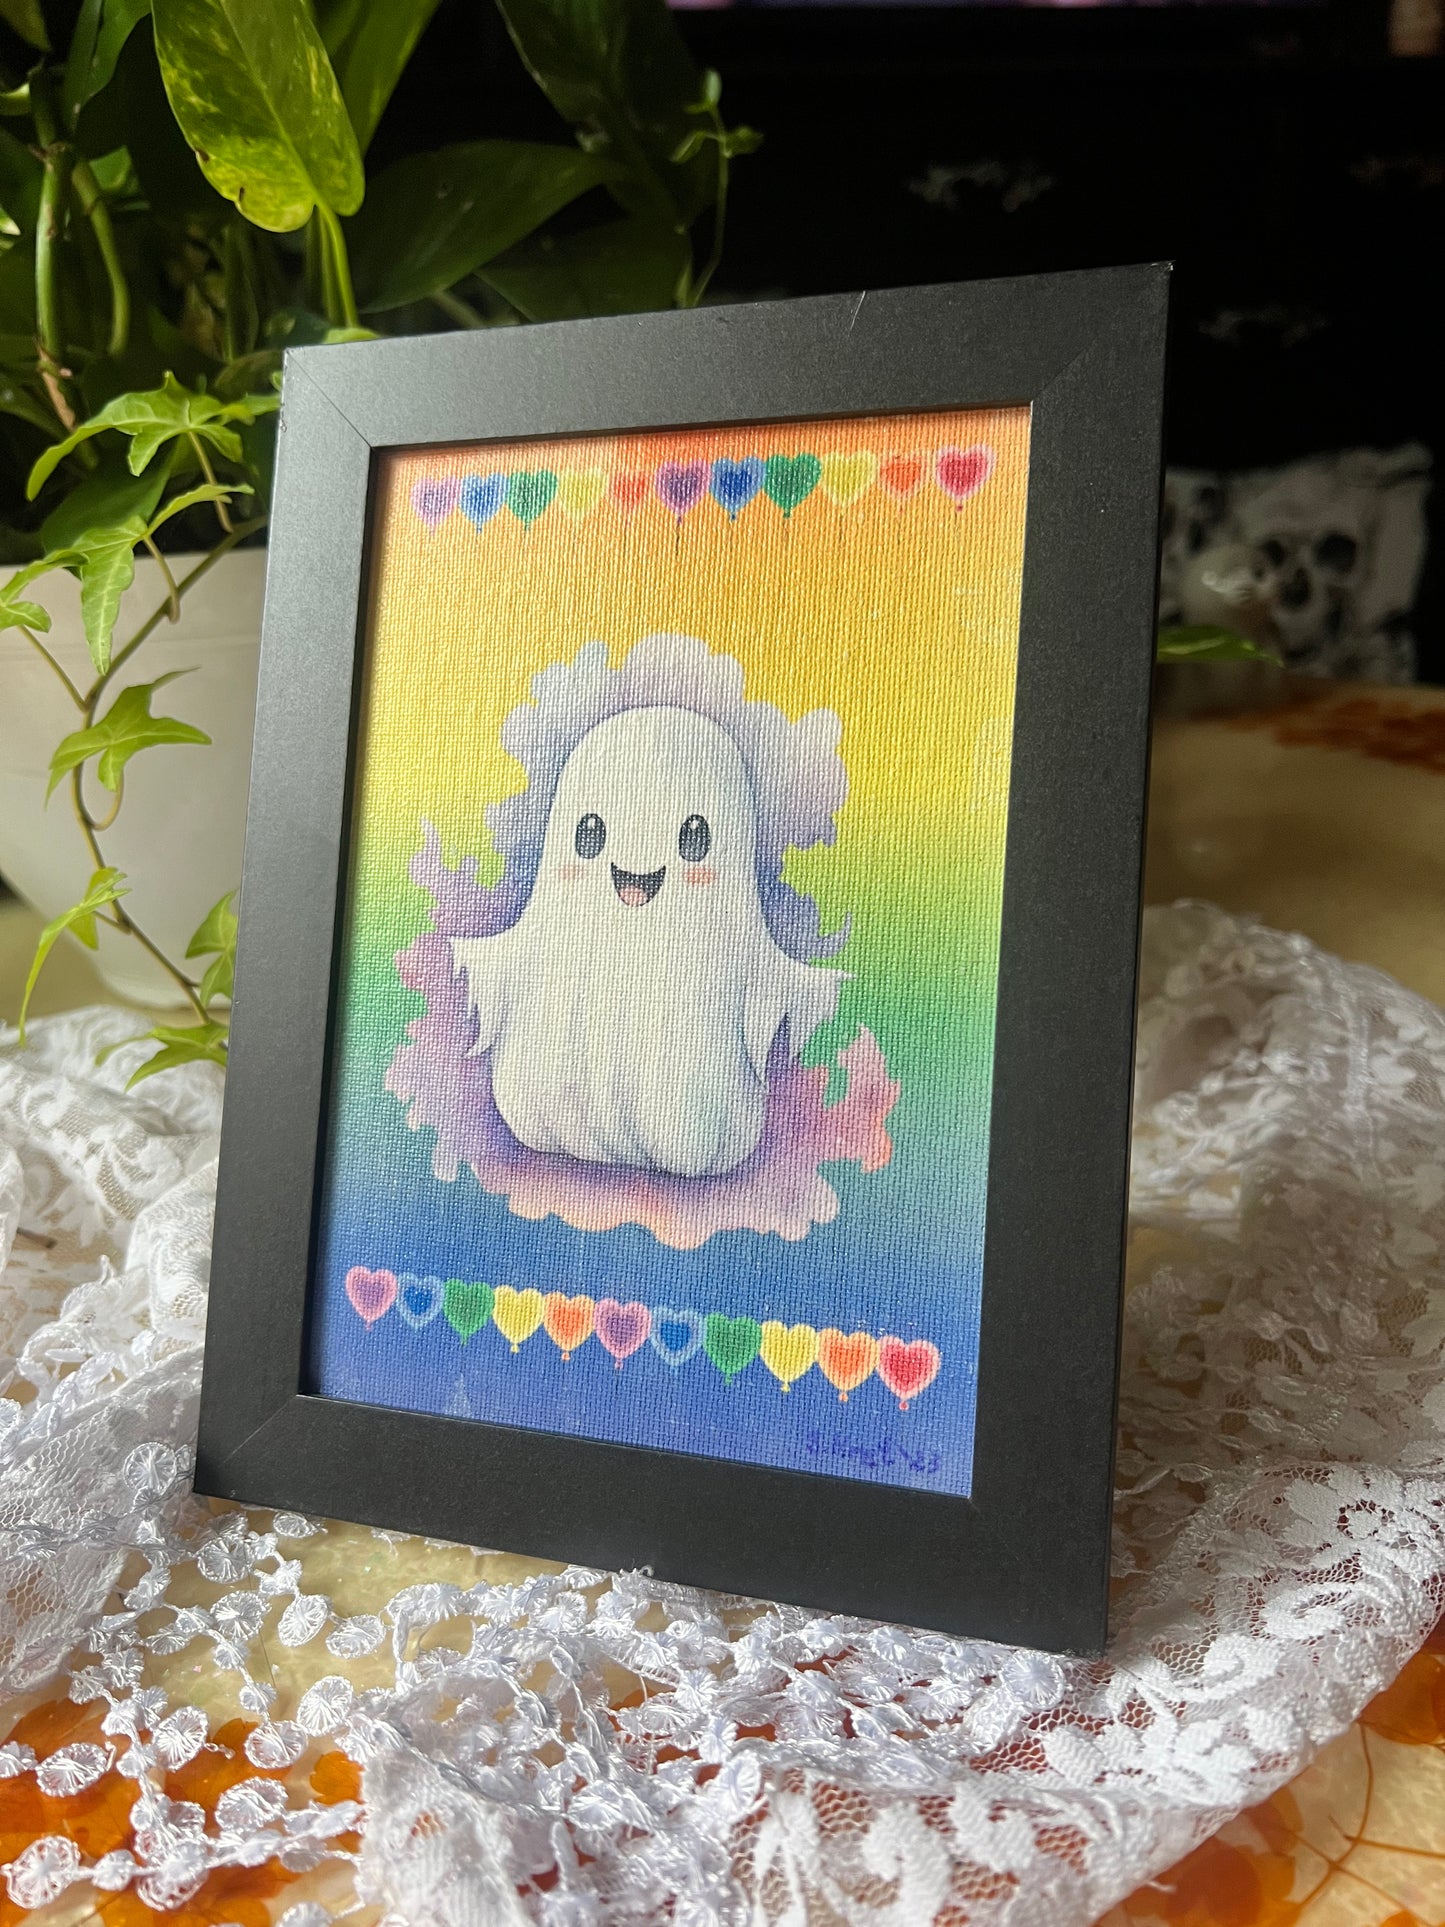 Cute Ghost Picture, Wall Hanging, Tabletop Display, Hearts and Rainbows